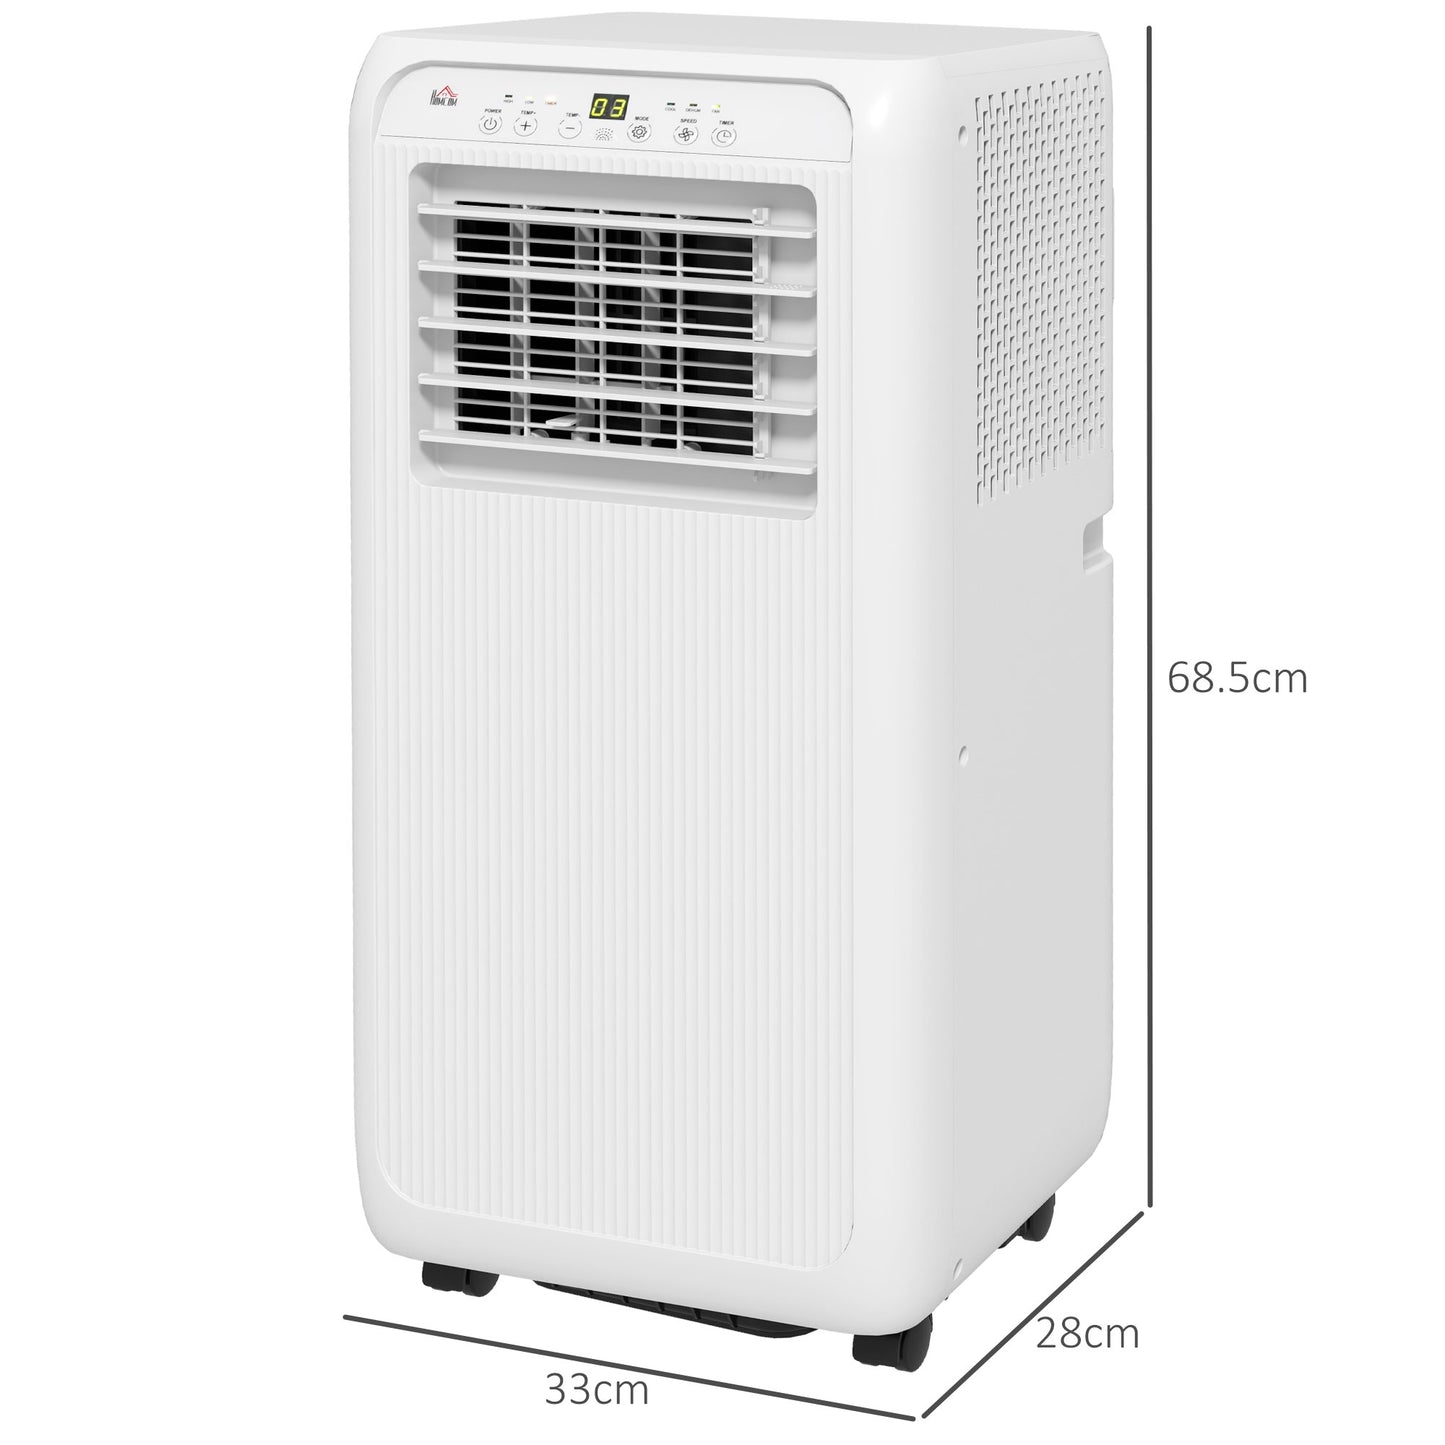 HOMCOM 7,000 BTU Mobile Air Conditioner for Room up to 15m with Dehumidifier 24H Timer Wheels Window Mount Kit